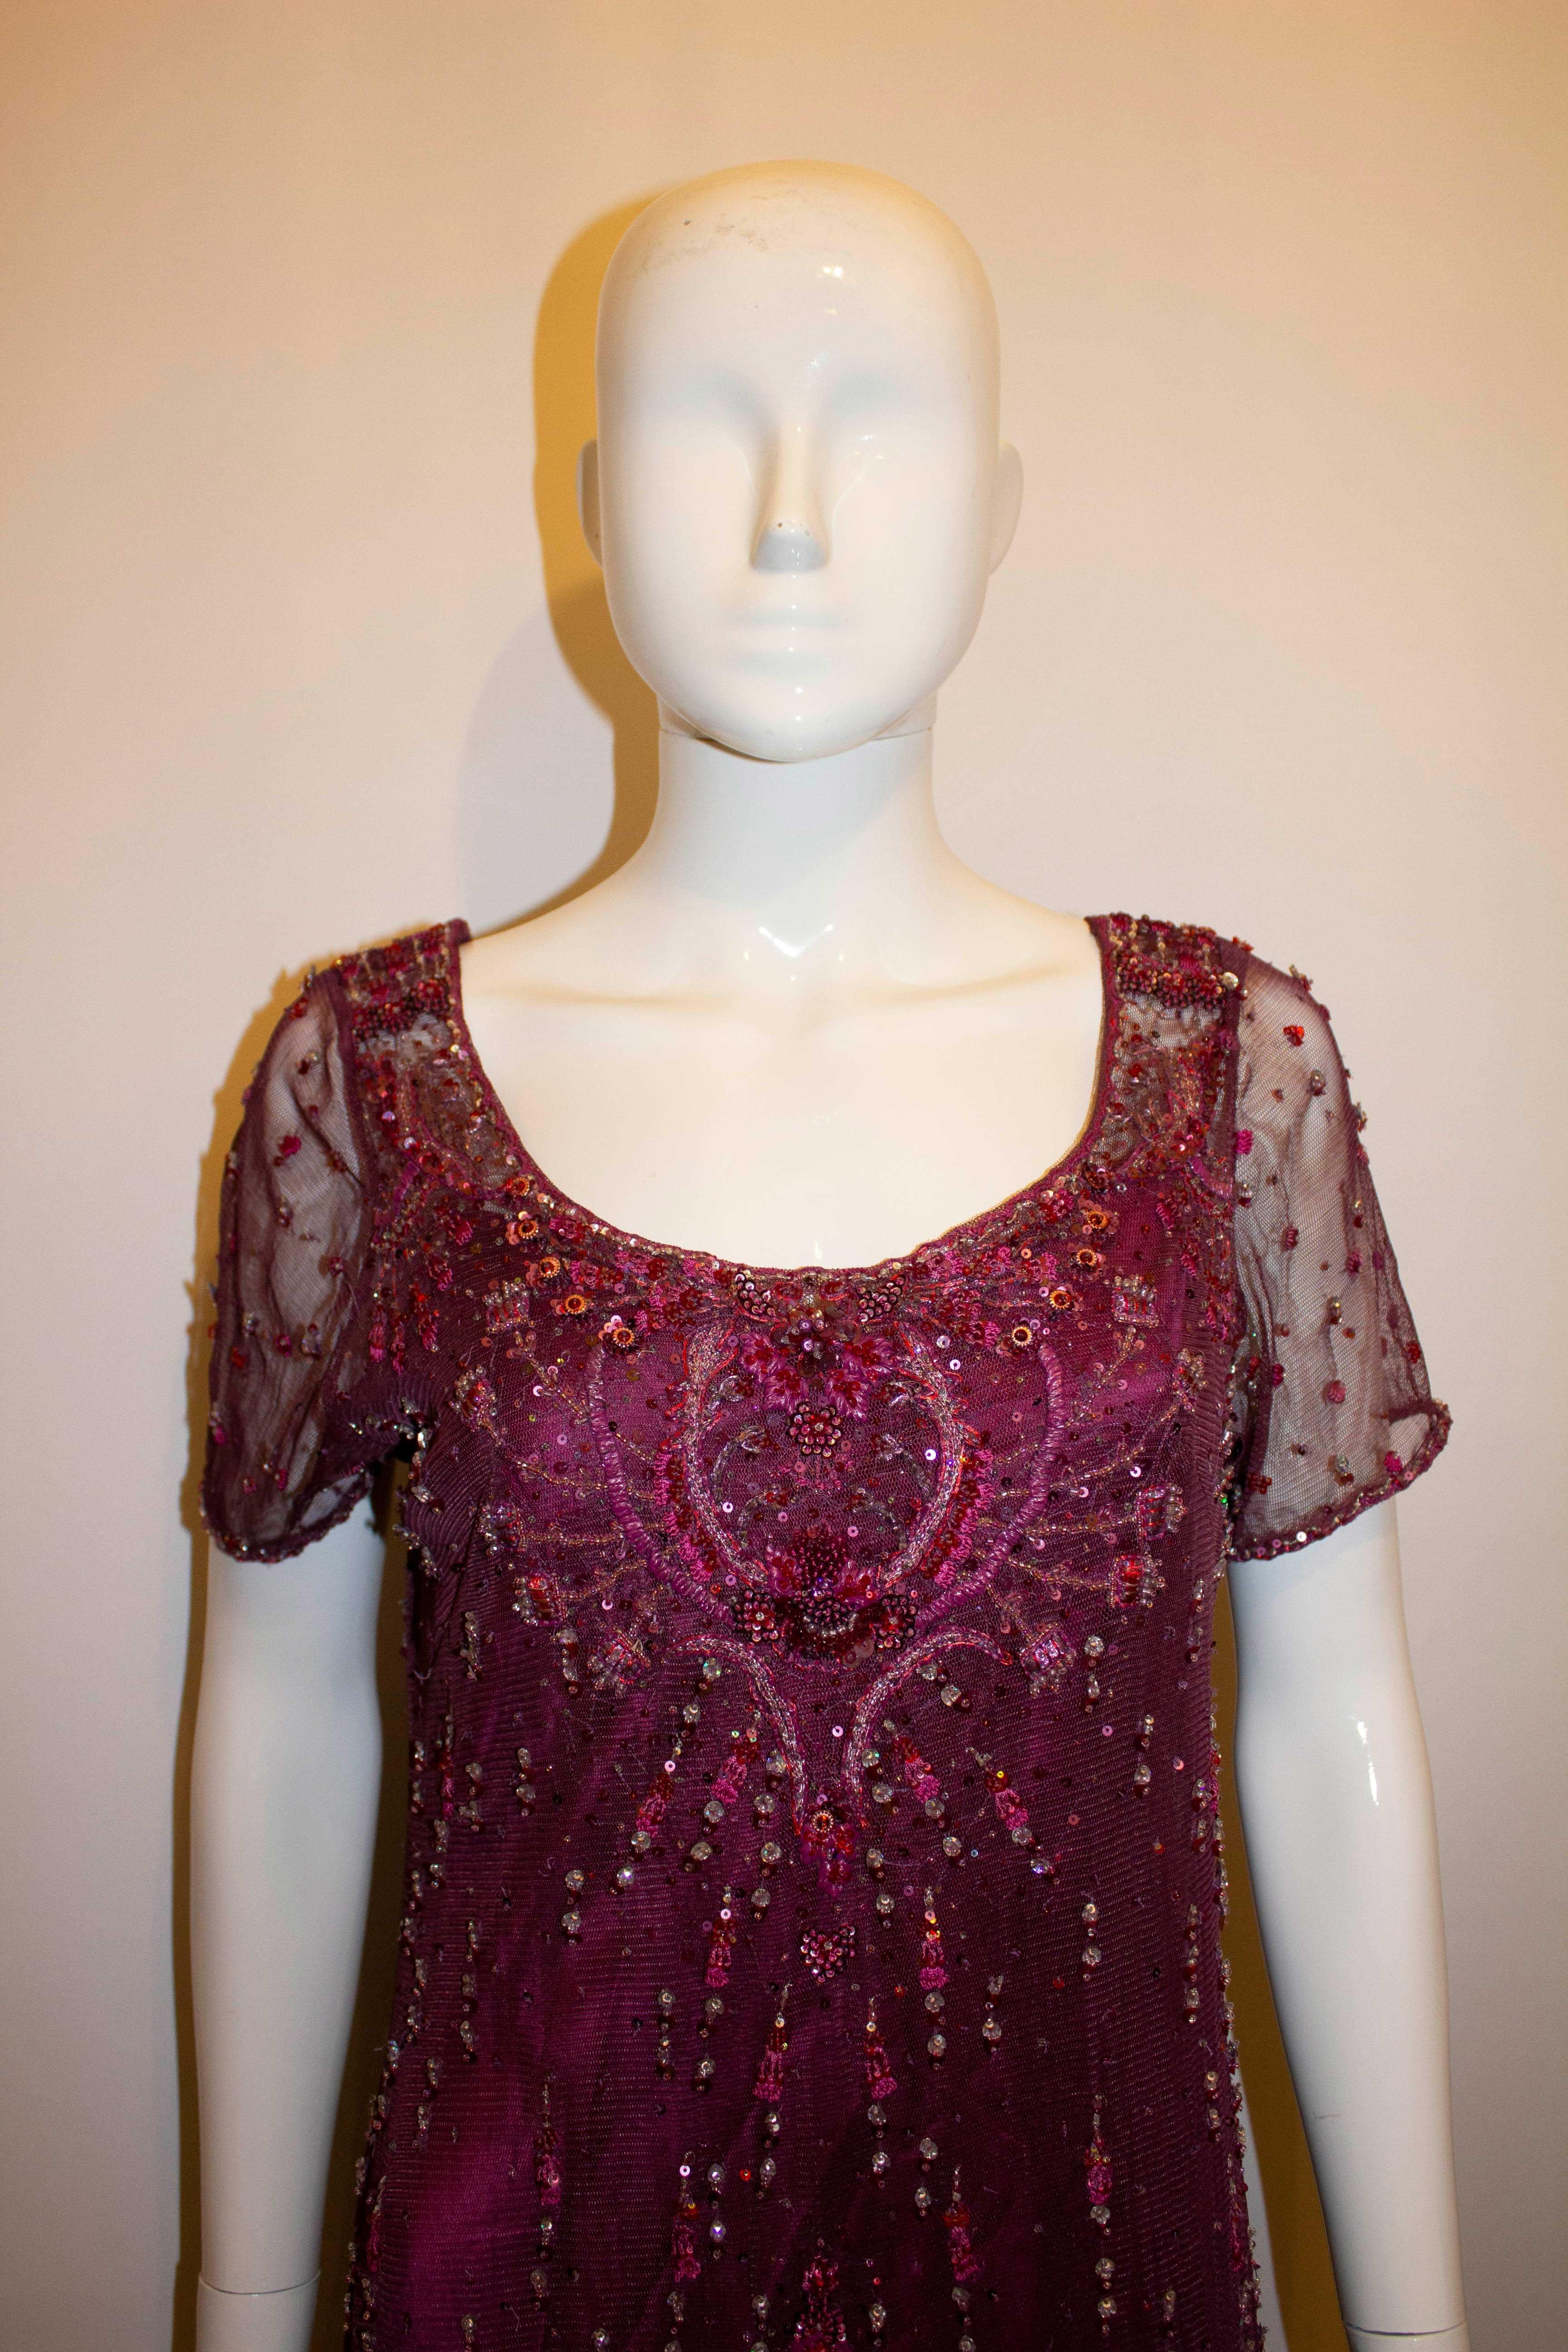 A head turning and easy to wear evening gown by Bellville Sassoon /Lorcan Mullany. The outer fabric is net with bead and sequin detail. The lining / slip dress is in plum silk. The dress has a button back opening and short sleaves. UK size 14,